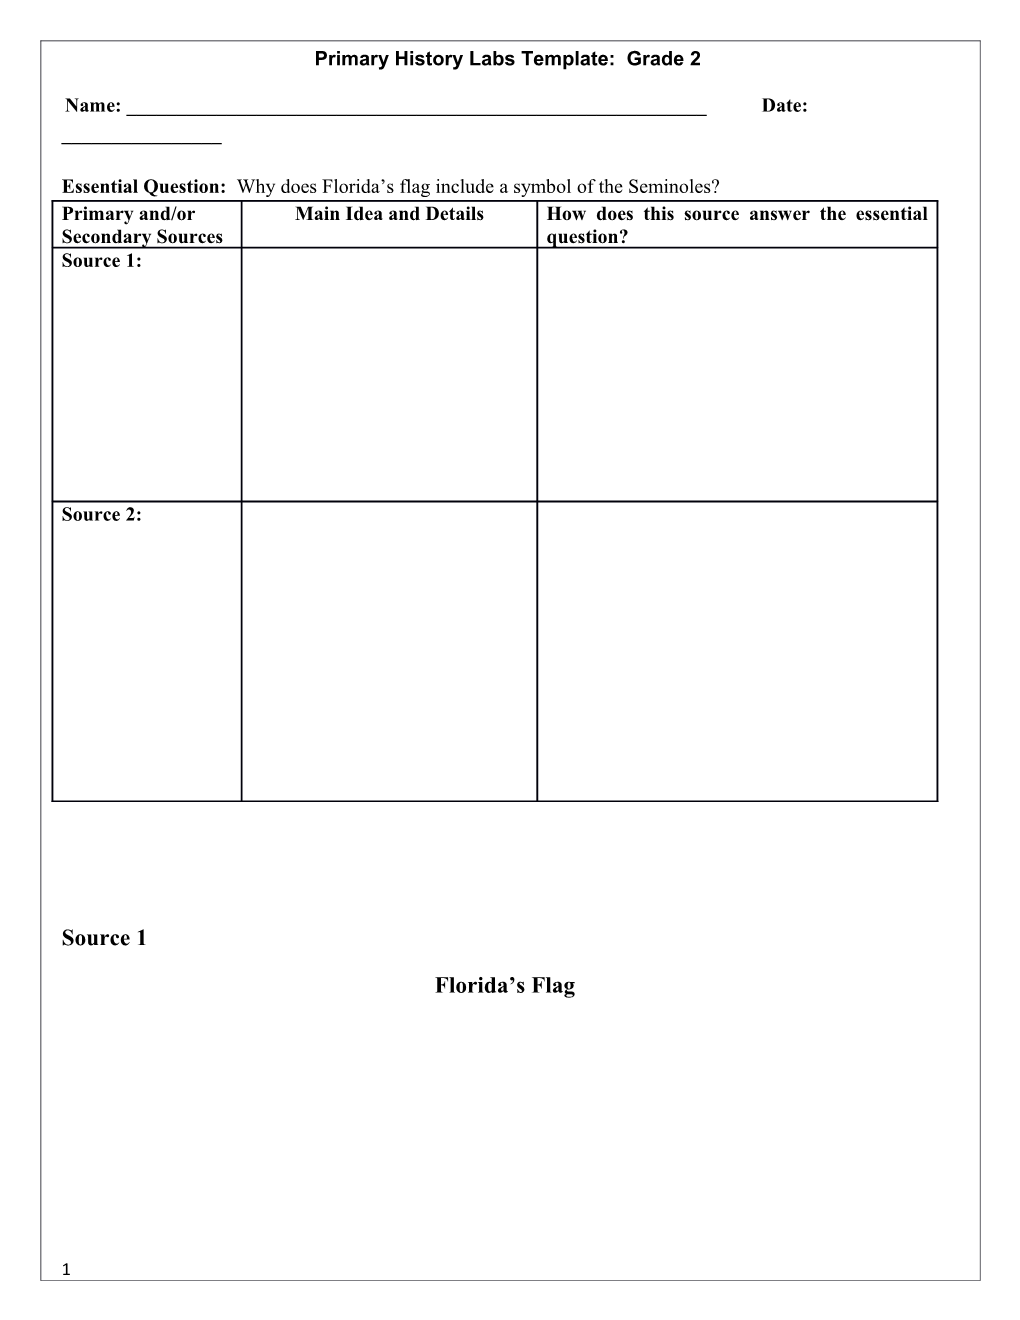 Primary History Labs Template: Grade 2